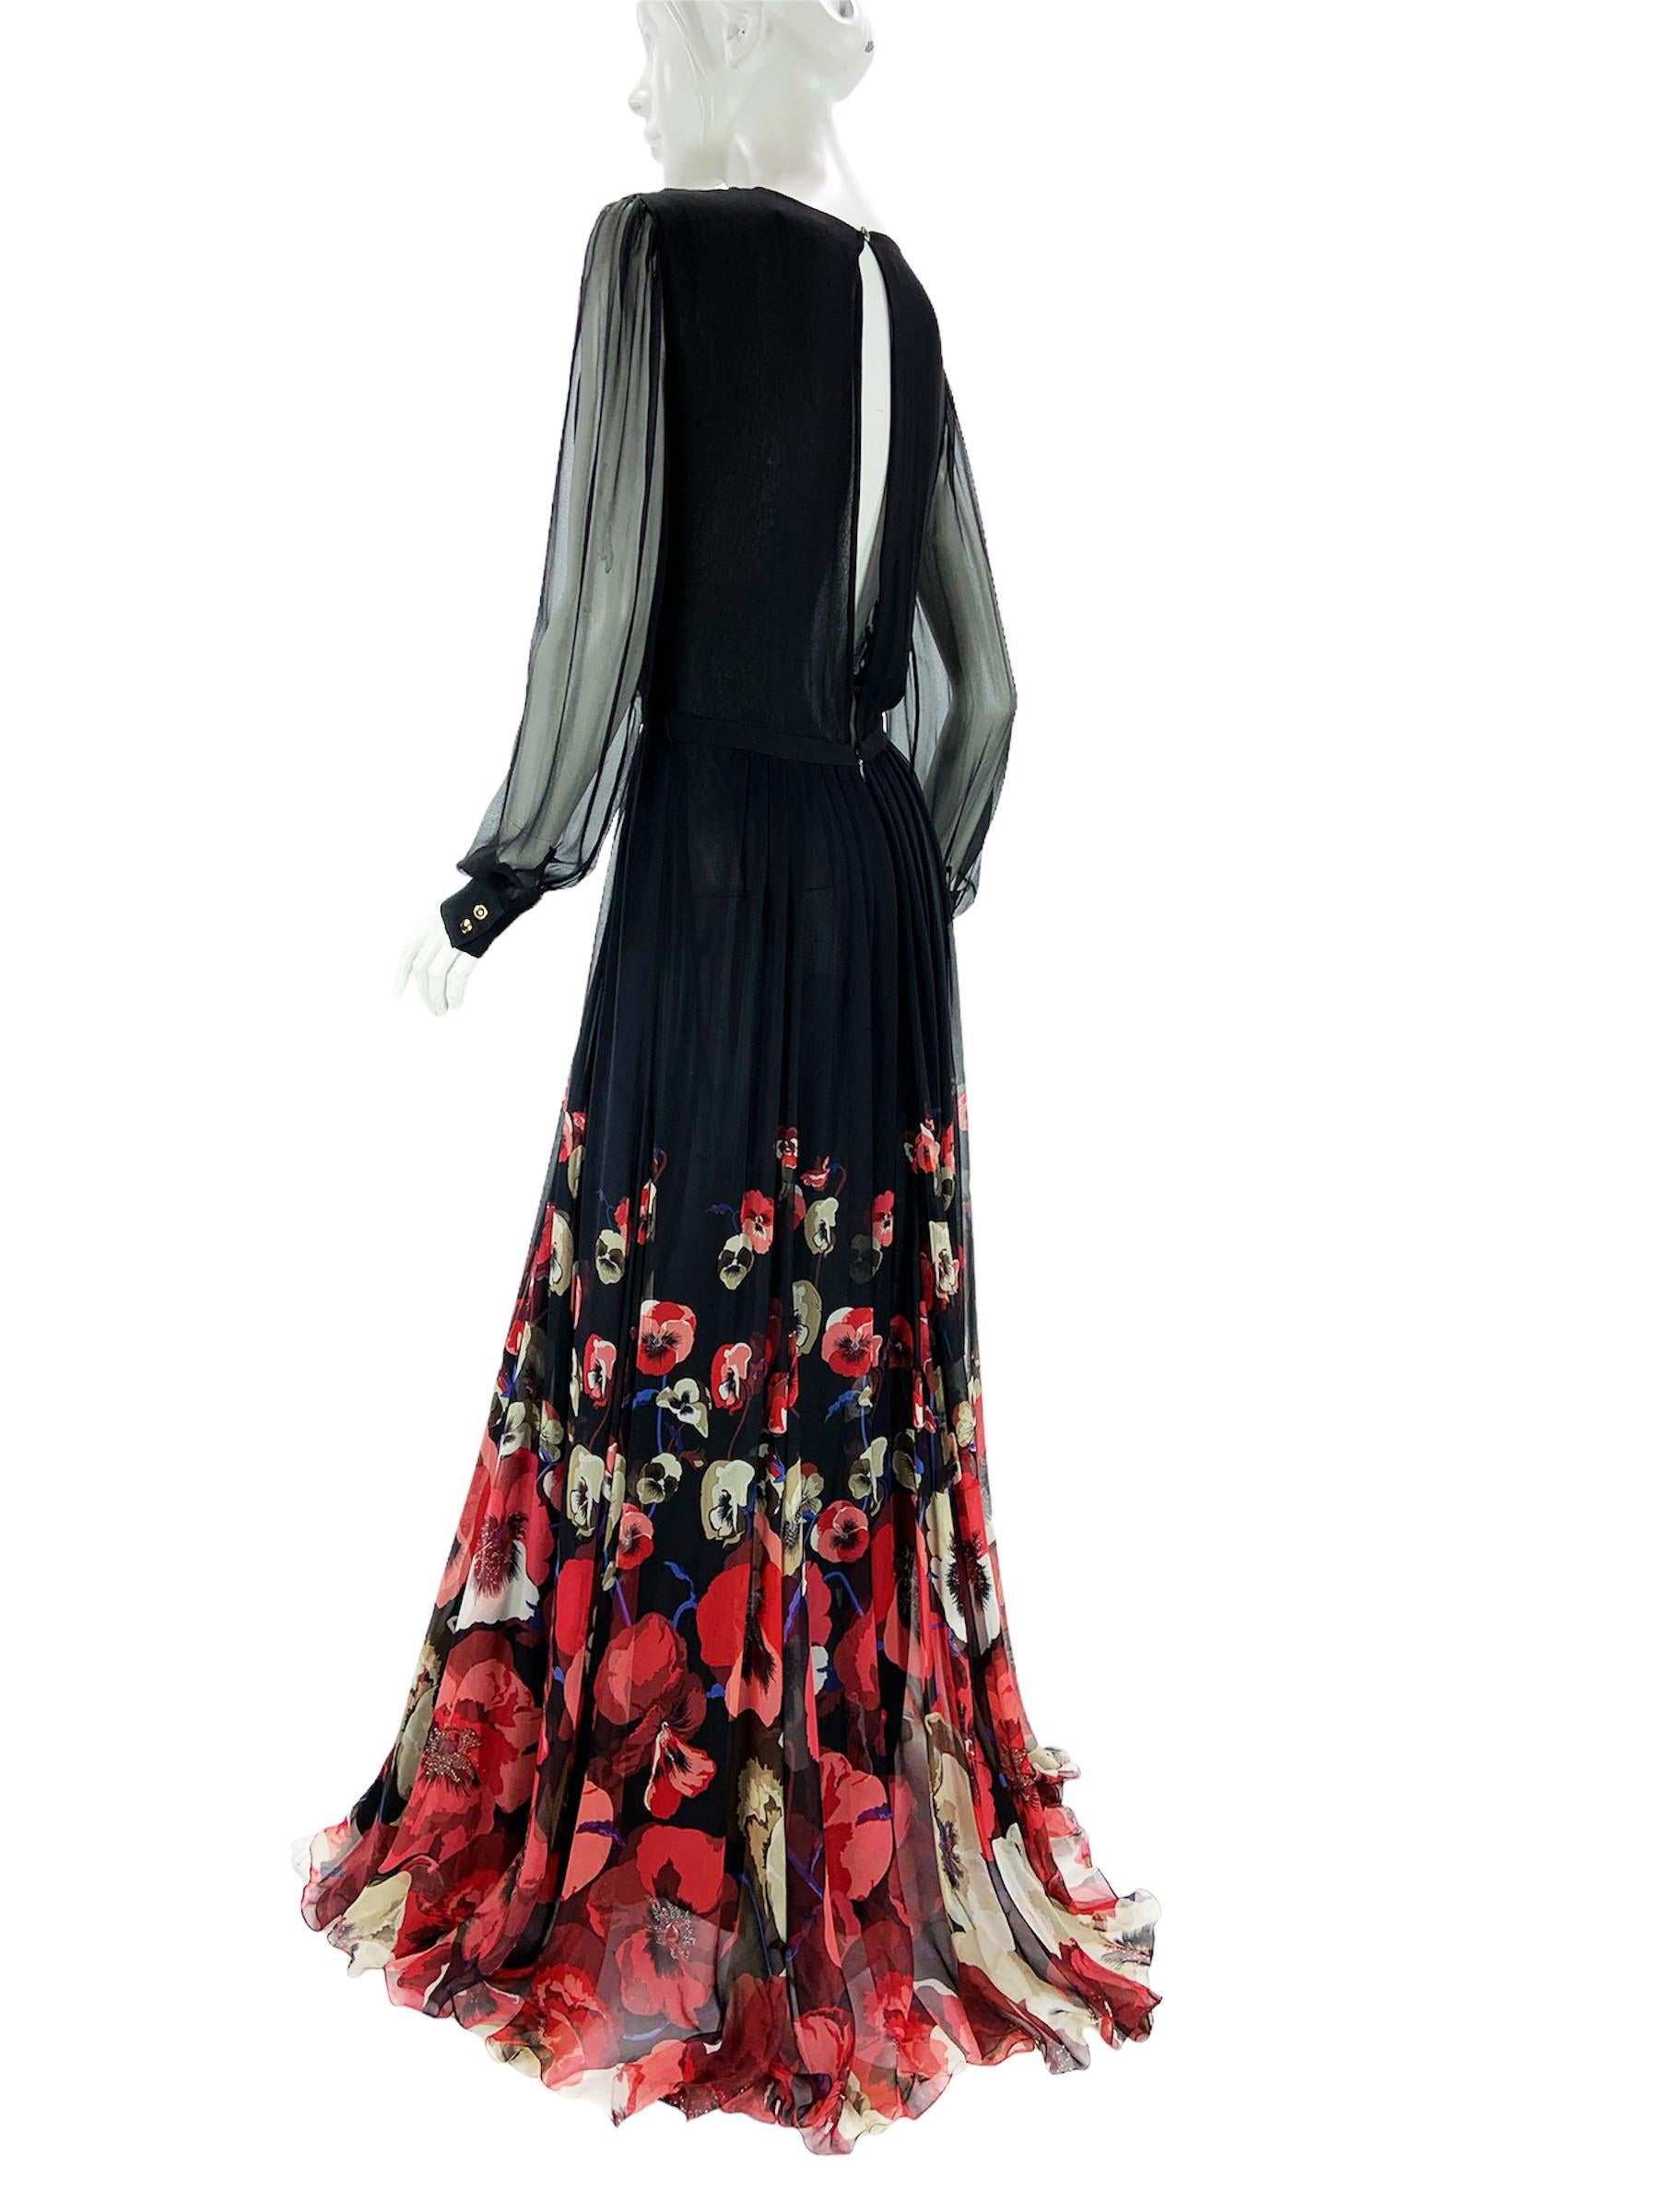 Gucci Black Silk Plunging Pansies Flowers Print Long Dress Gown Italian 42 US 6 For Sale 3